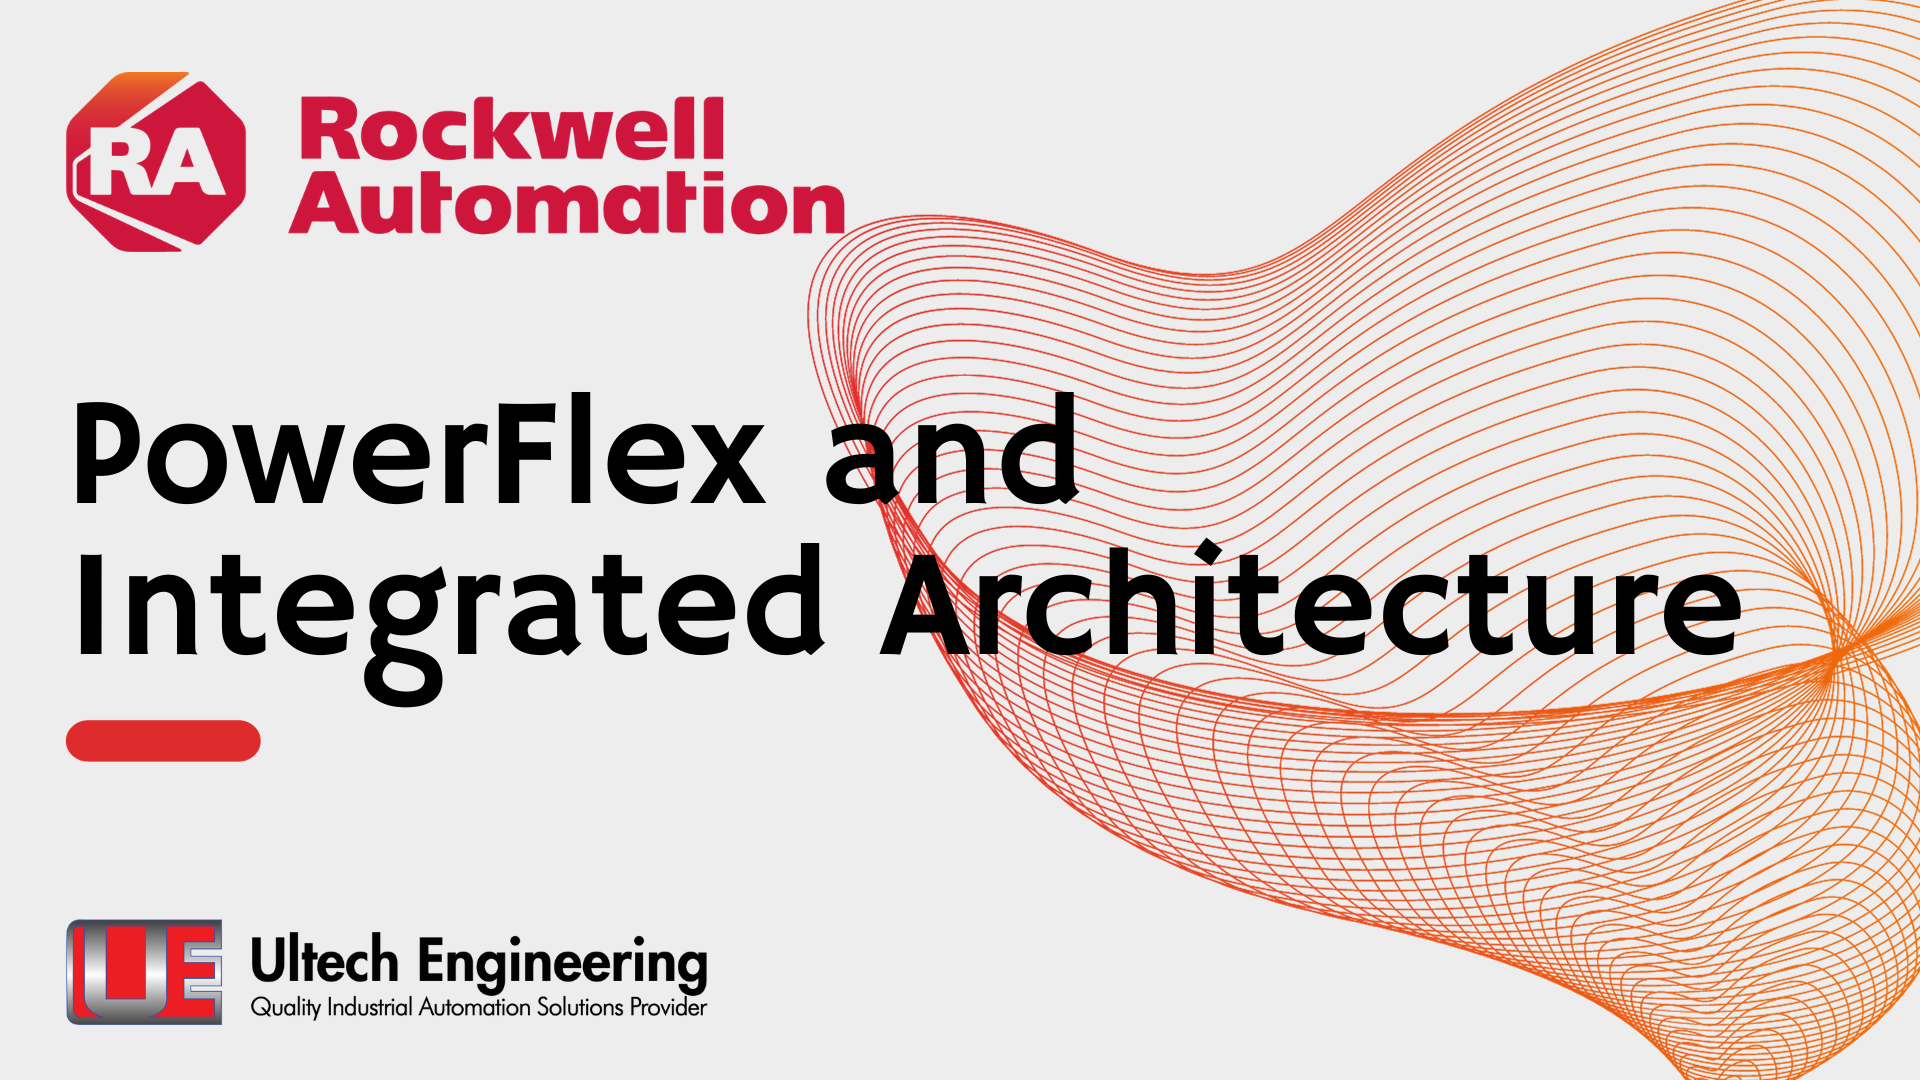 Ultech Engineering: Your Trusted Partner for Rockwell Automation's PowerFlex Series in Integrated Architecture